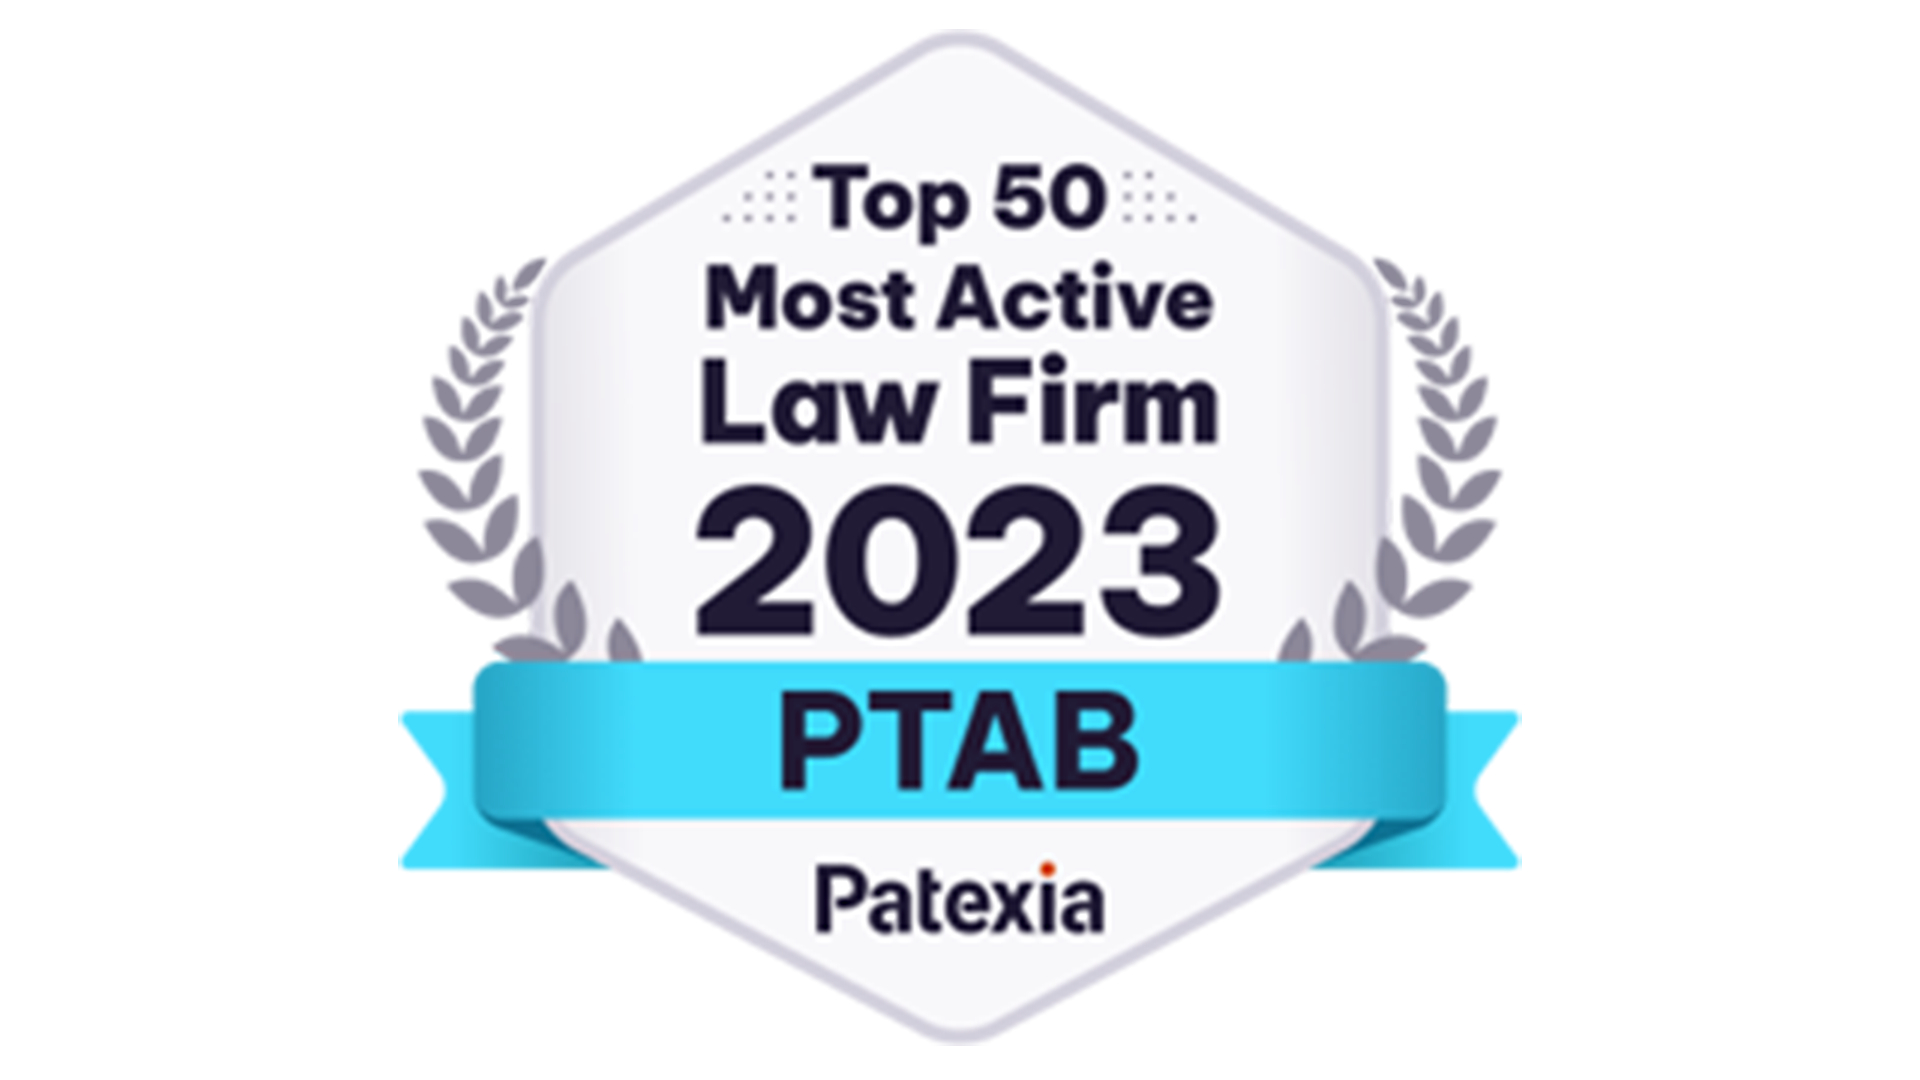 Patexia Insight awarded our IP team the Top 50 Most Active practices